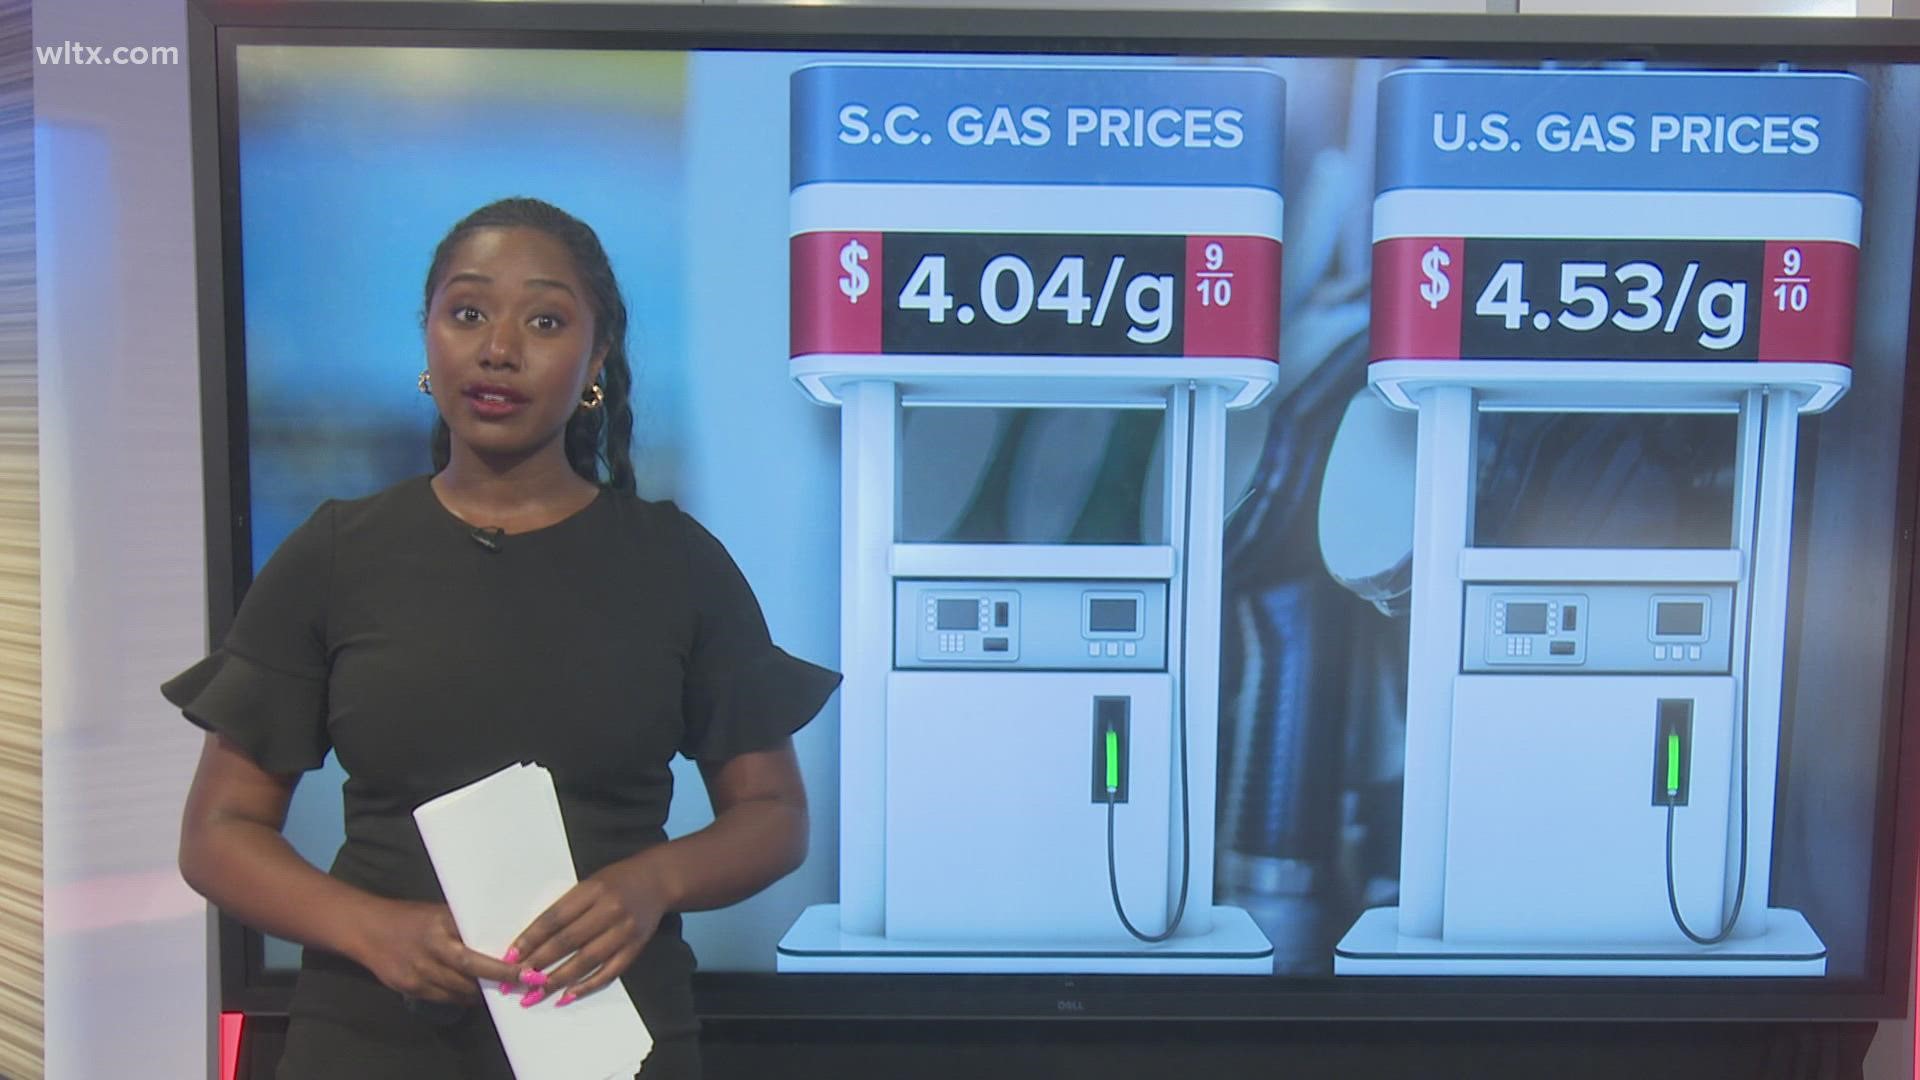 AAA reports that the average cost of gas around the state is about $4.04 per gallon.